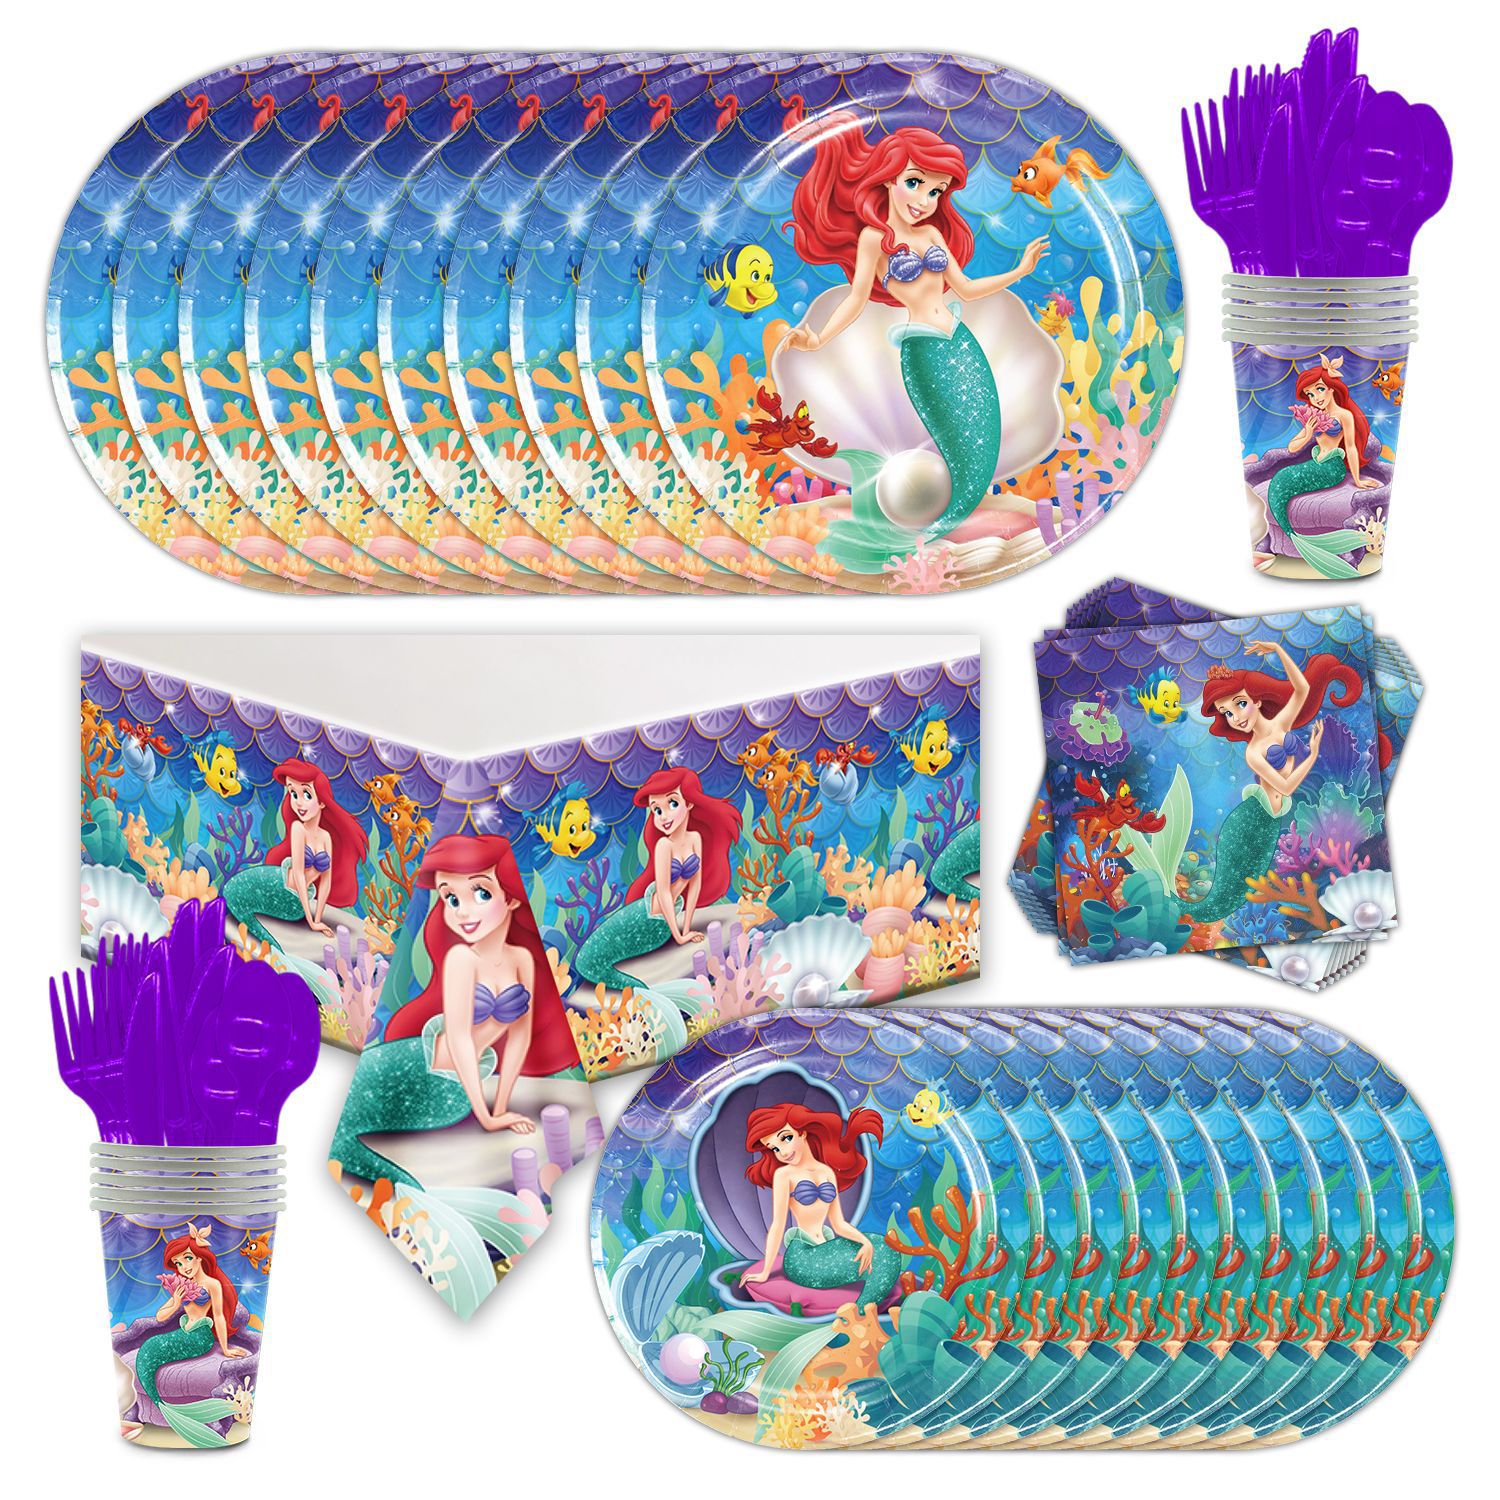 New style Little Mermaid Ariel Theme Girl Birthday Party Paper Plate Napkin Tablecloth Disposable Tableware Kids 1 - Ariel Doll